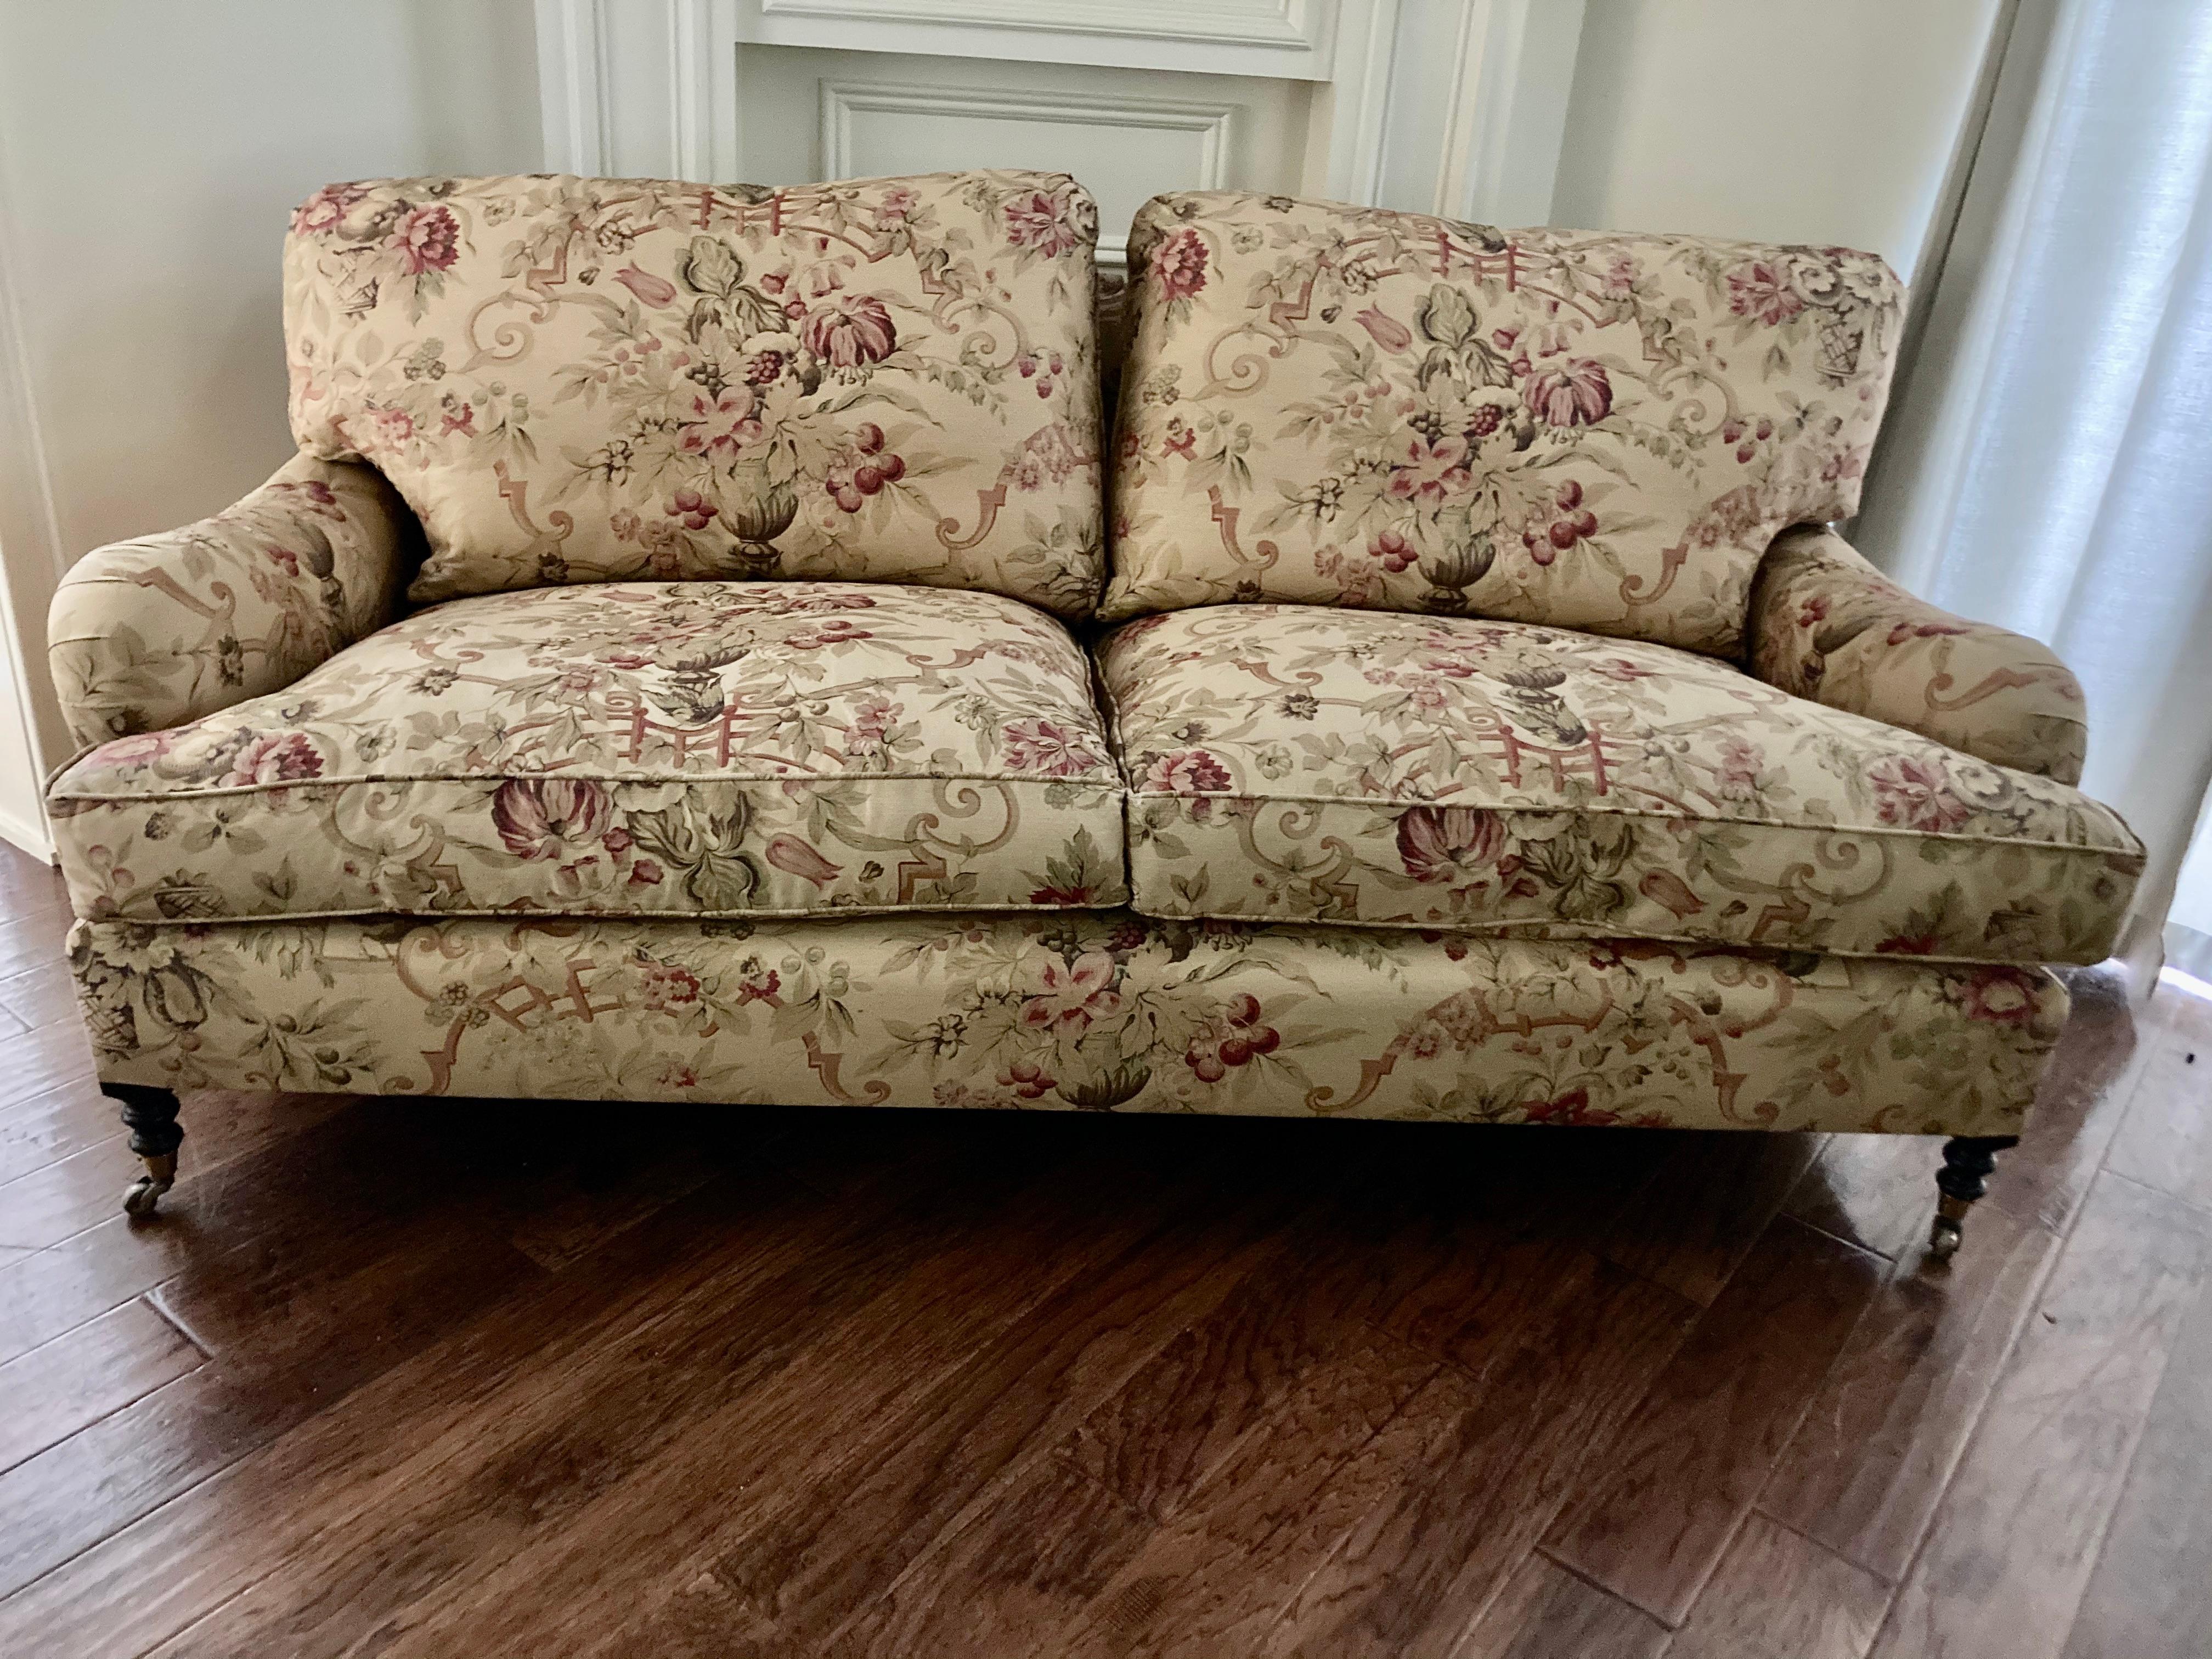 Gorgeous George smith sofa with 2 loose seat and back cushions plushly filled with plump down feathers and having elegant English roll arms. Upholstered in the sought after classic neutral George Smith Gollut fabric. 
Measure: Seat height 20.